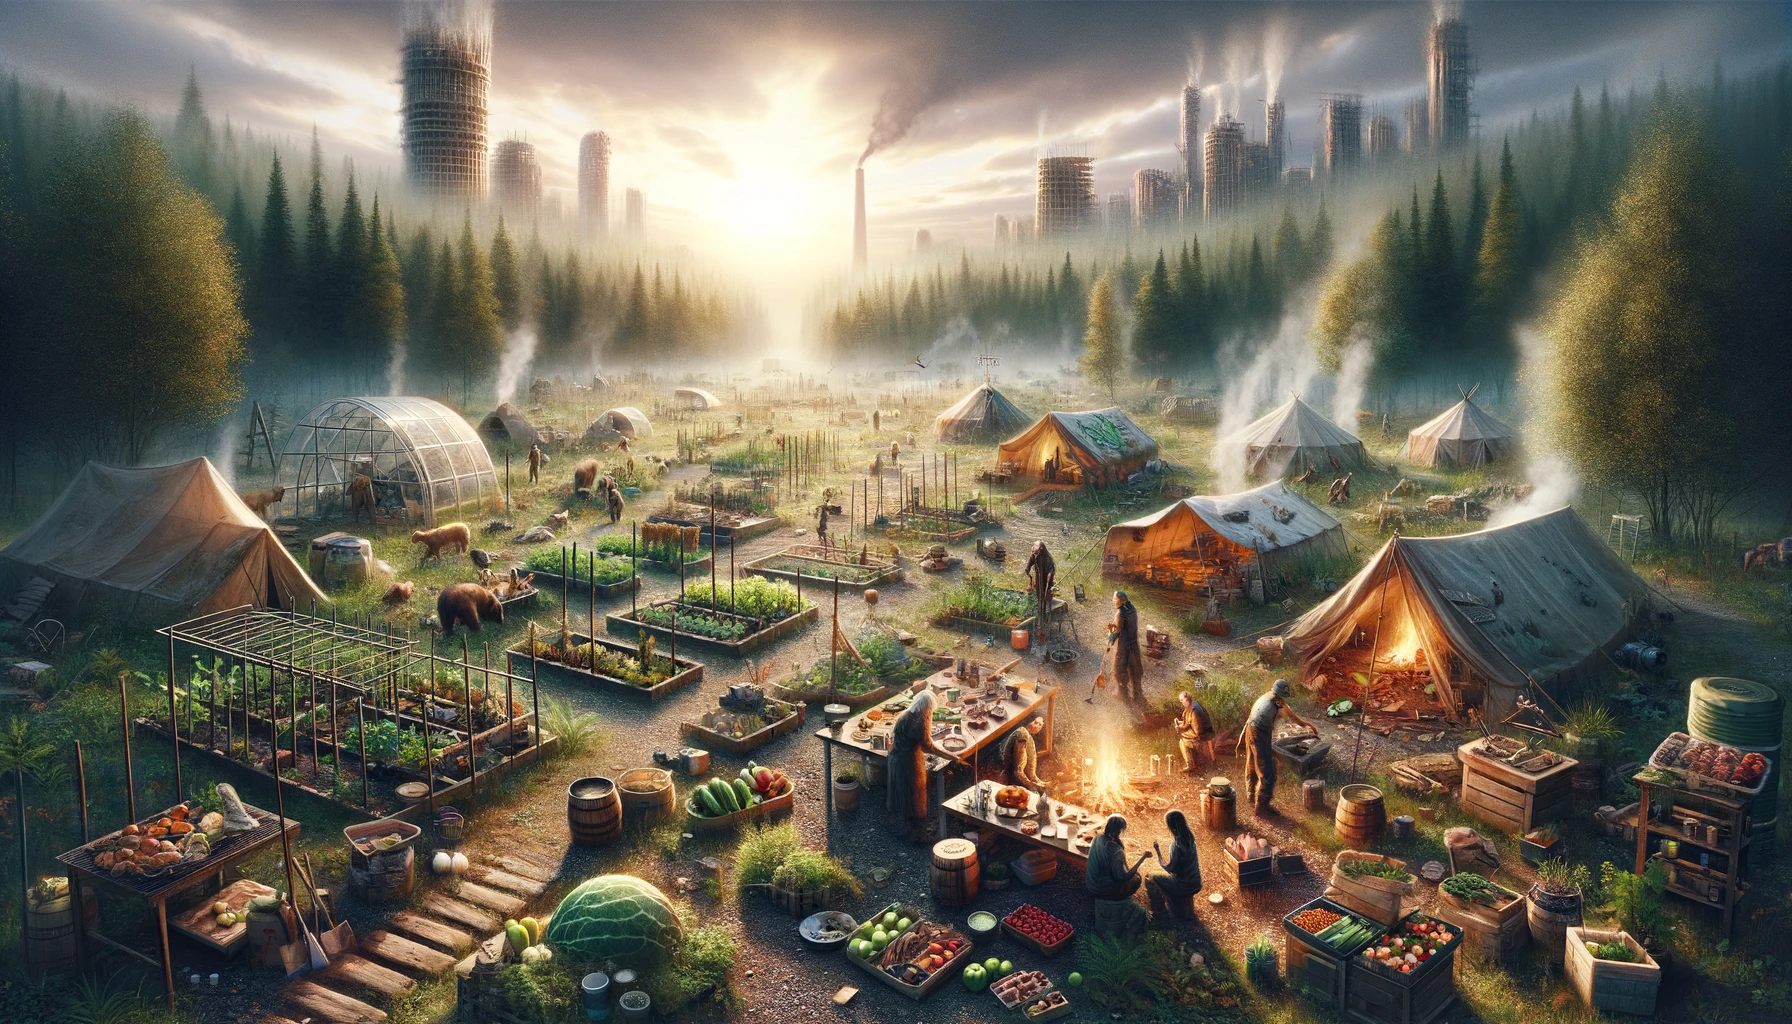 Expansive post-apocalyptic landscape with survivors implementing sustainable living, featuring gardening, foraging, hunting, and food preservation, symbolizing resilience and nutrition's critical role in long-term survival amidst regrowth of nature